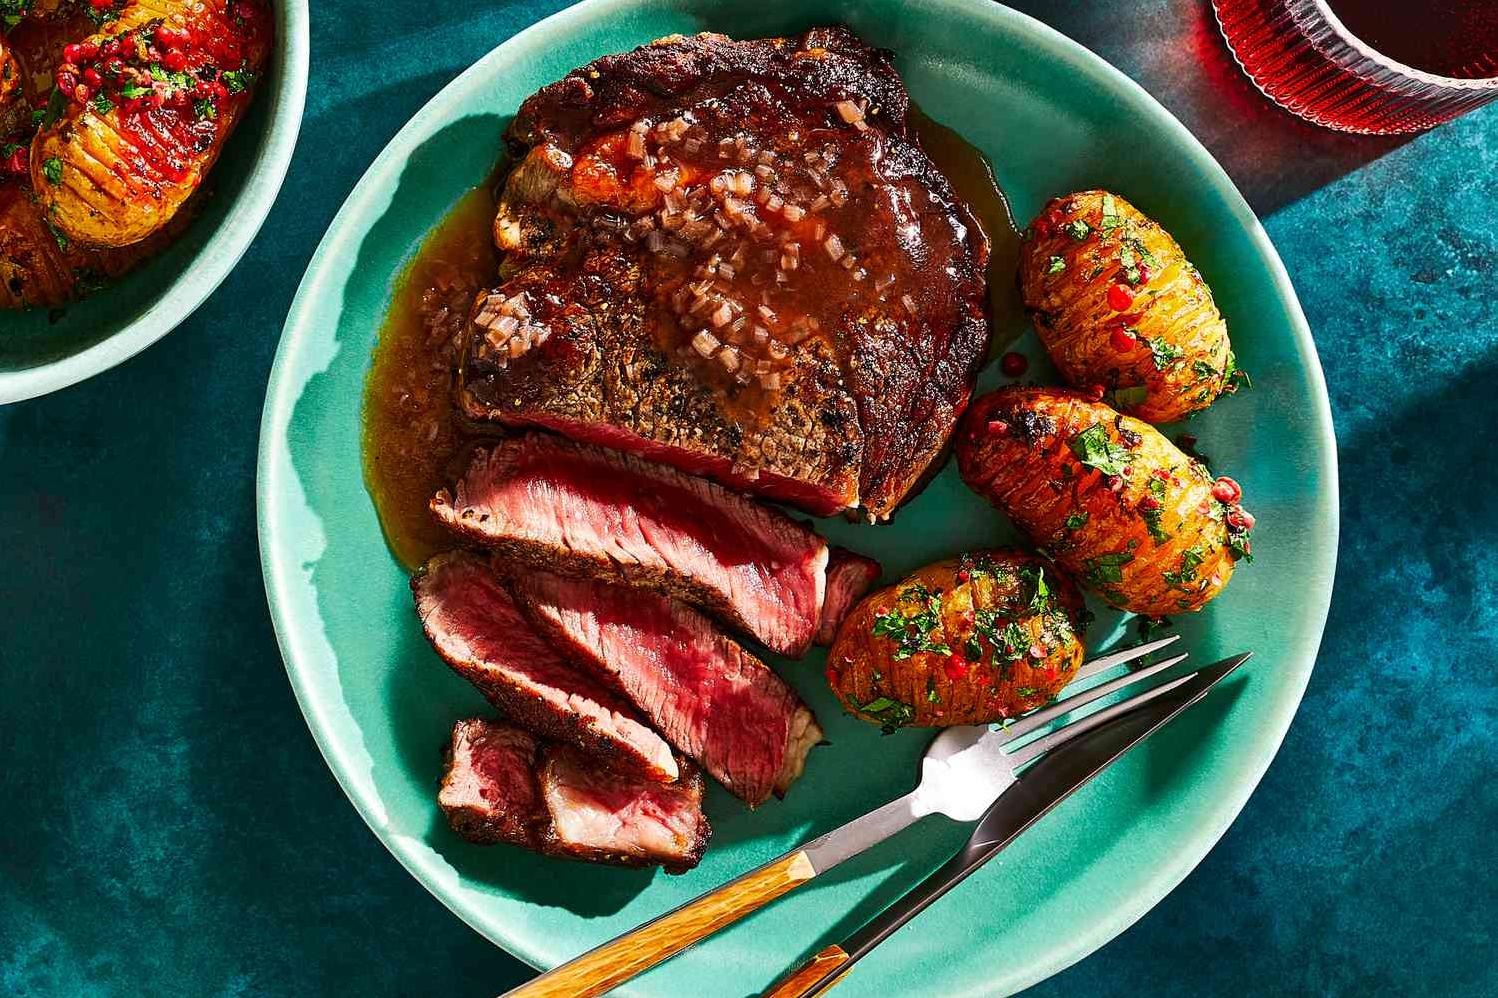  With just a few ingredients, you can elevate any steak to restaurant-level dining.